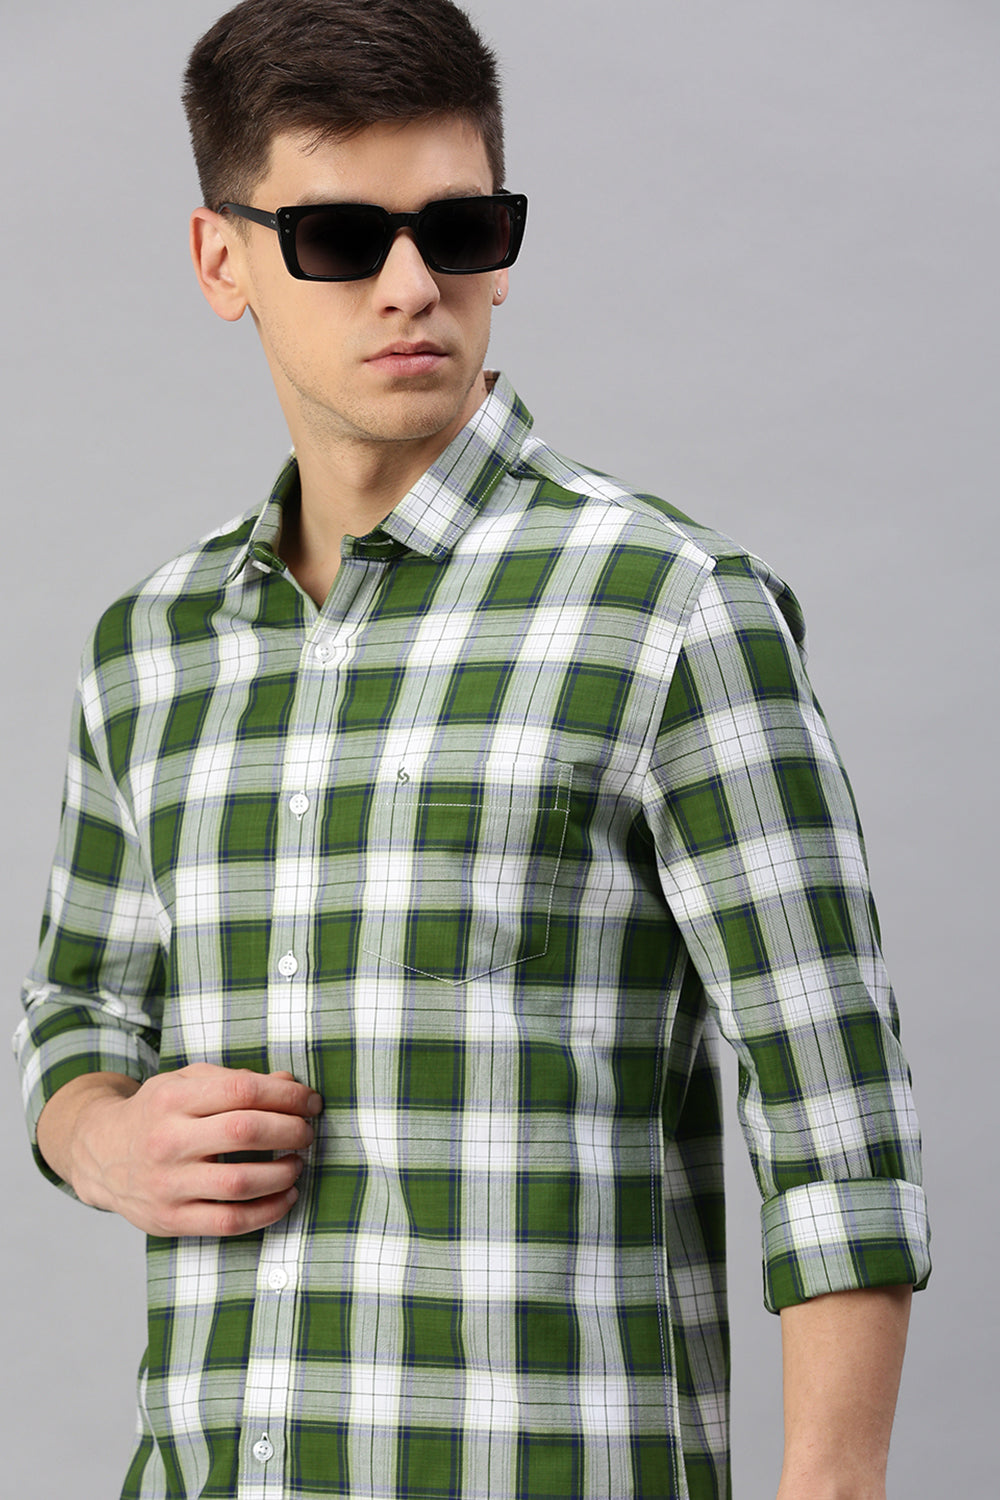 Classic Polo Men's Cotton Full Sleeve Checked Slim Fit Polo Neck Green Color Woven Shirt | So1-65 A